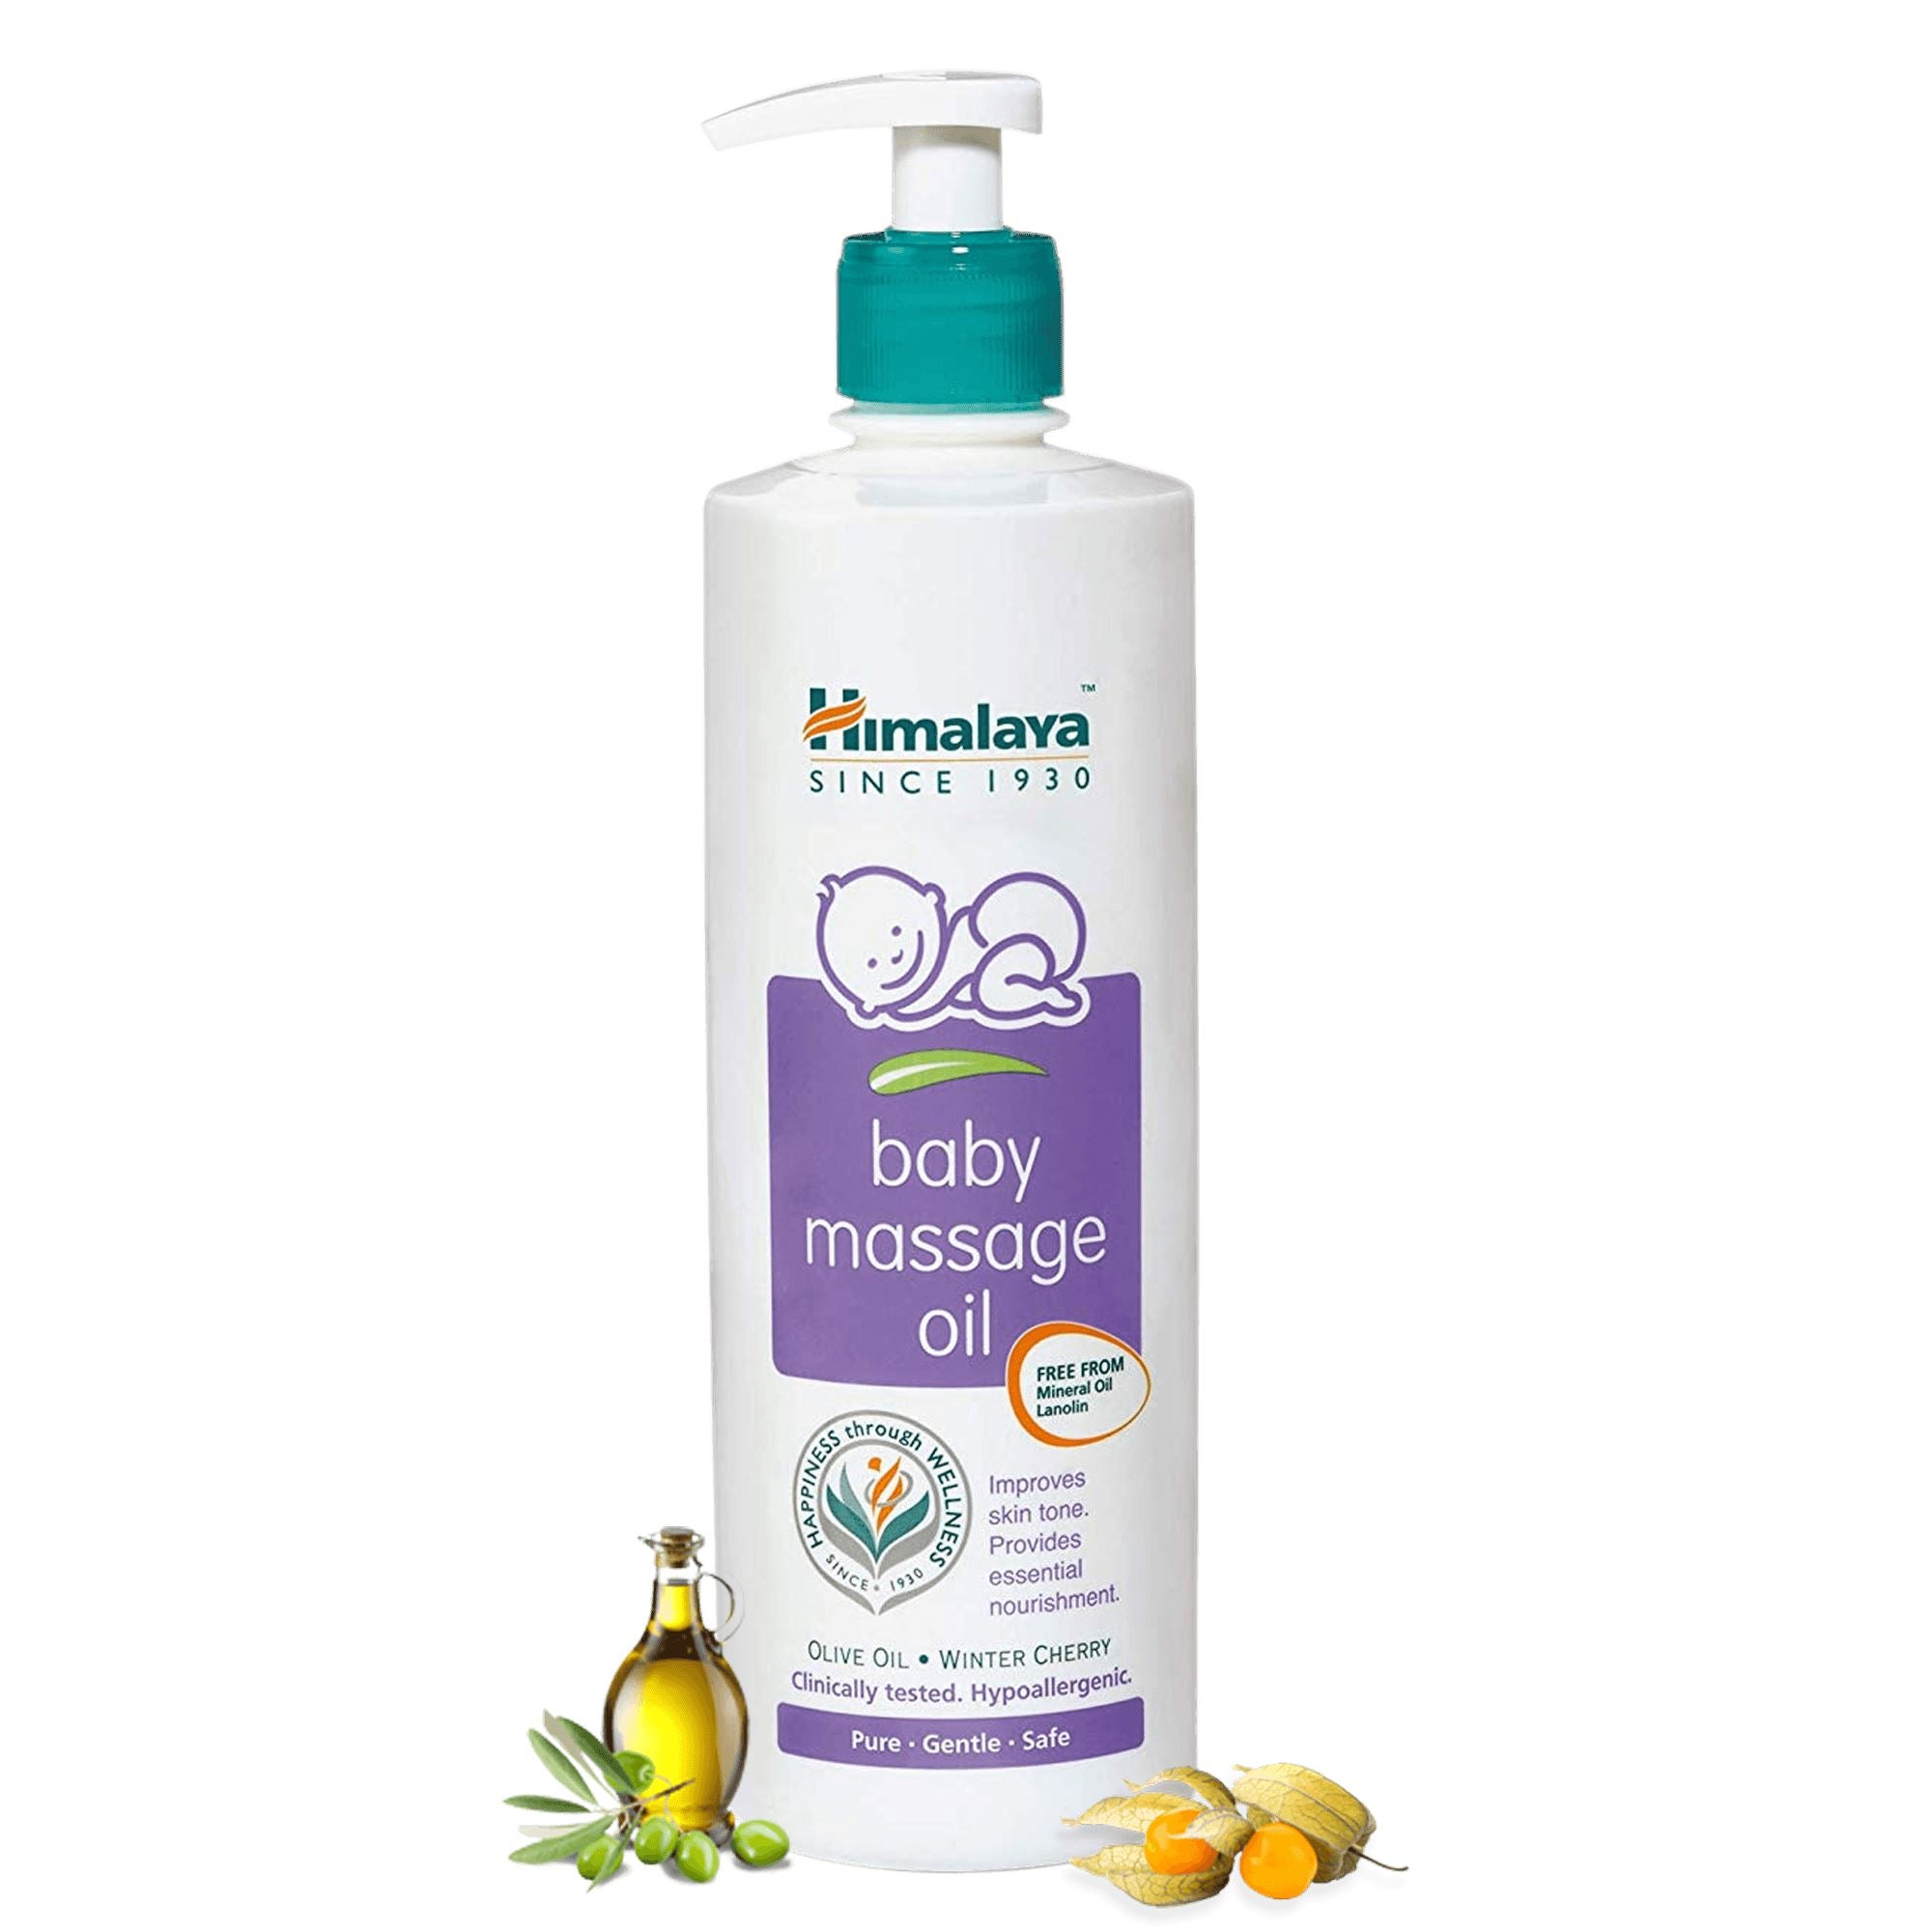 Himalaya baby massage oil - To improve baby's growth and development